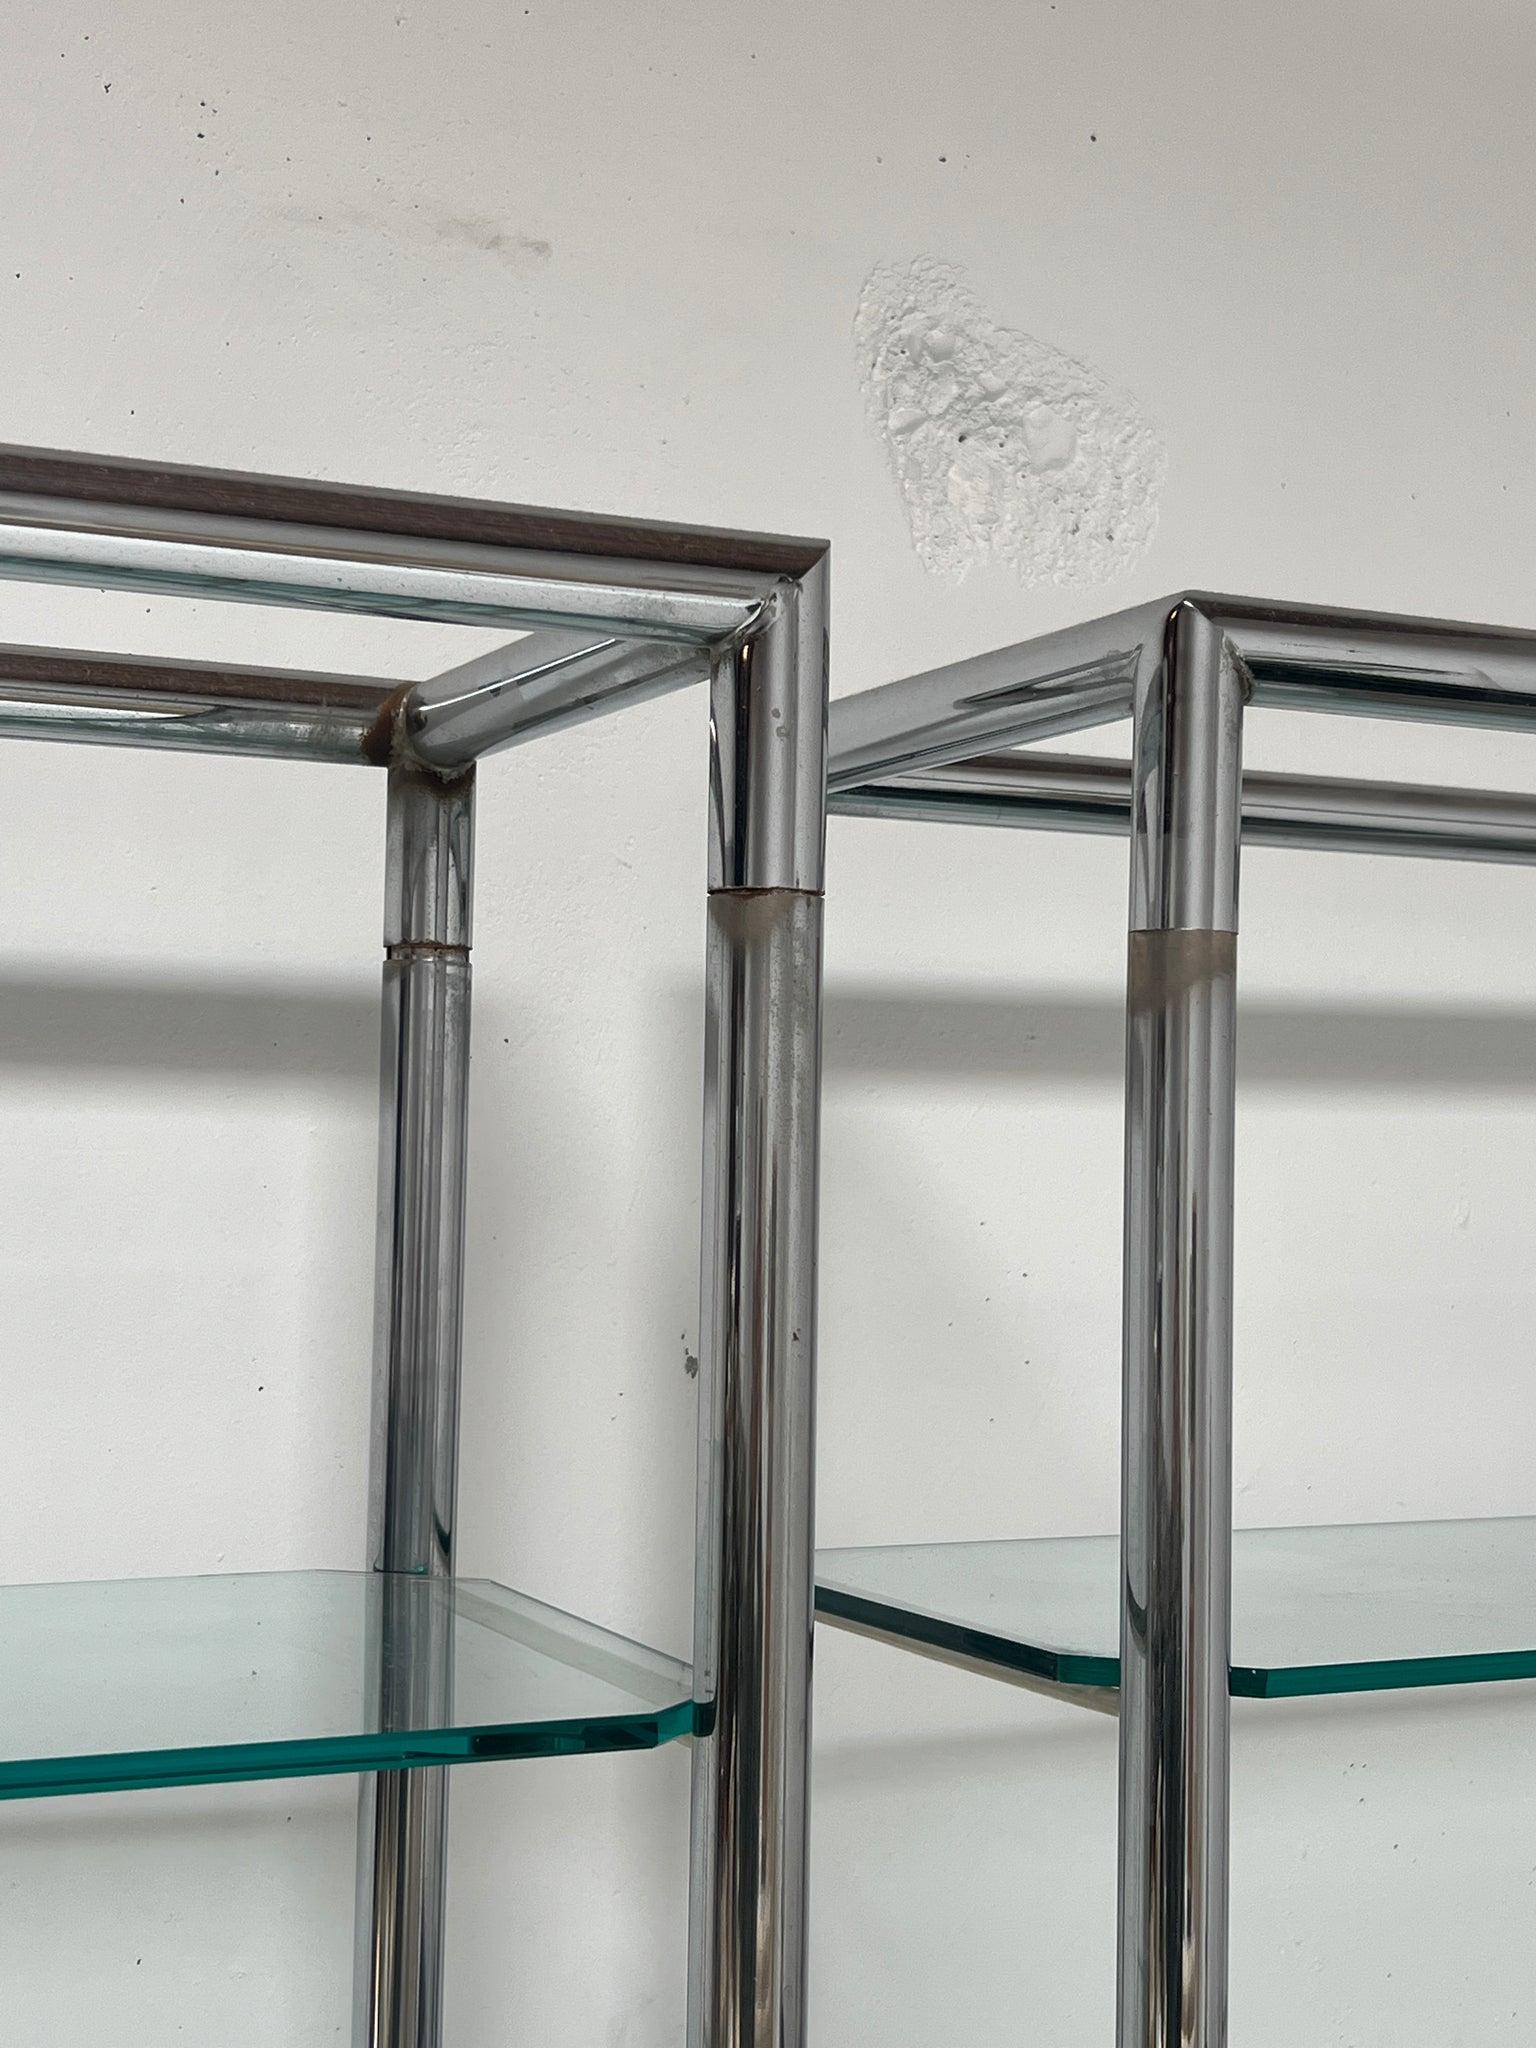 Priced per unit. 

Both pieces show signs of wear throughout and have light scratches on the glass shelves(easily covered with books and decor). There are also signs of rusting on the corners (shown in photos). Please note that the bottom glass